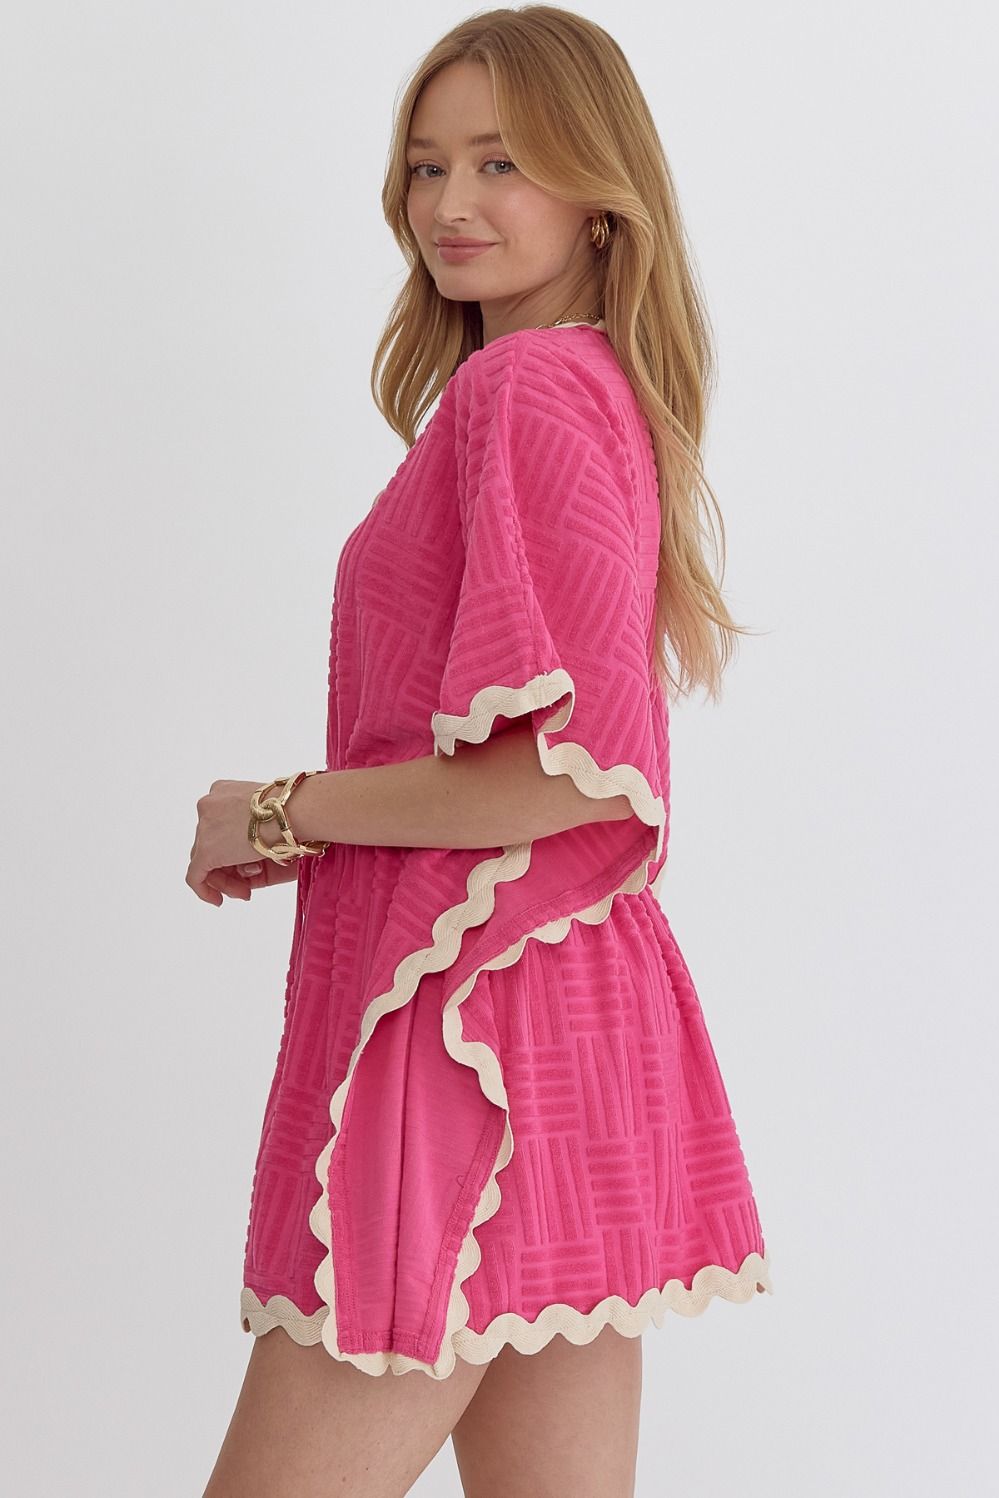 The Boardwalk Textured Terry Cloth Coverup